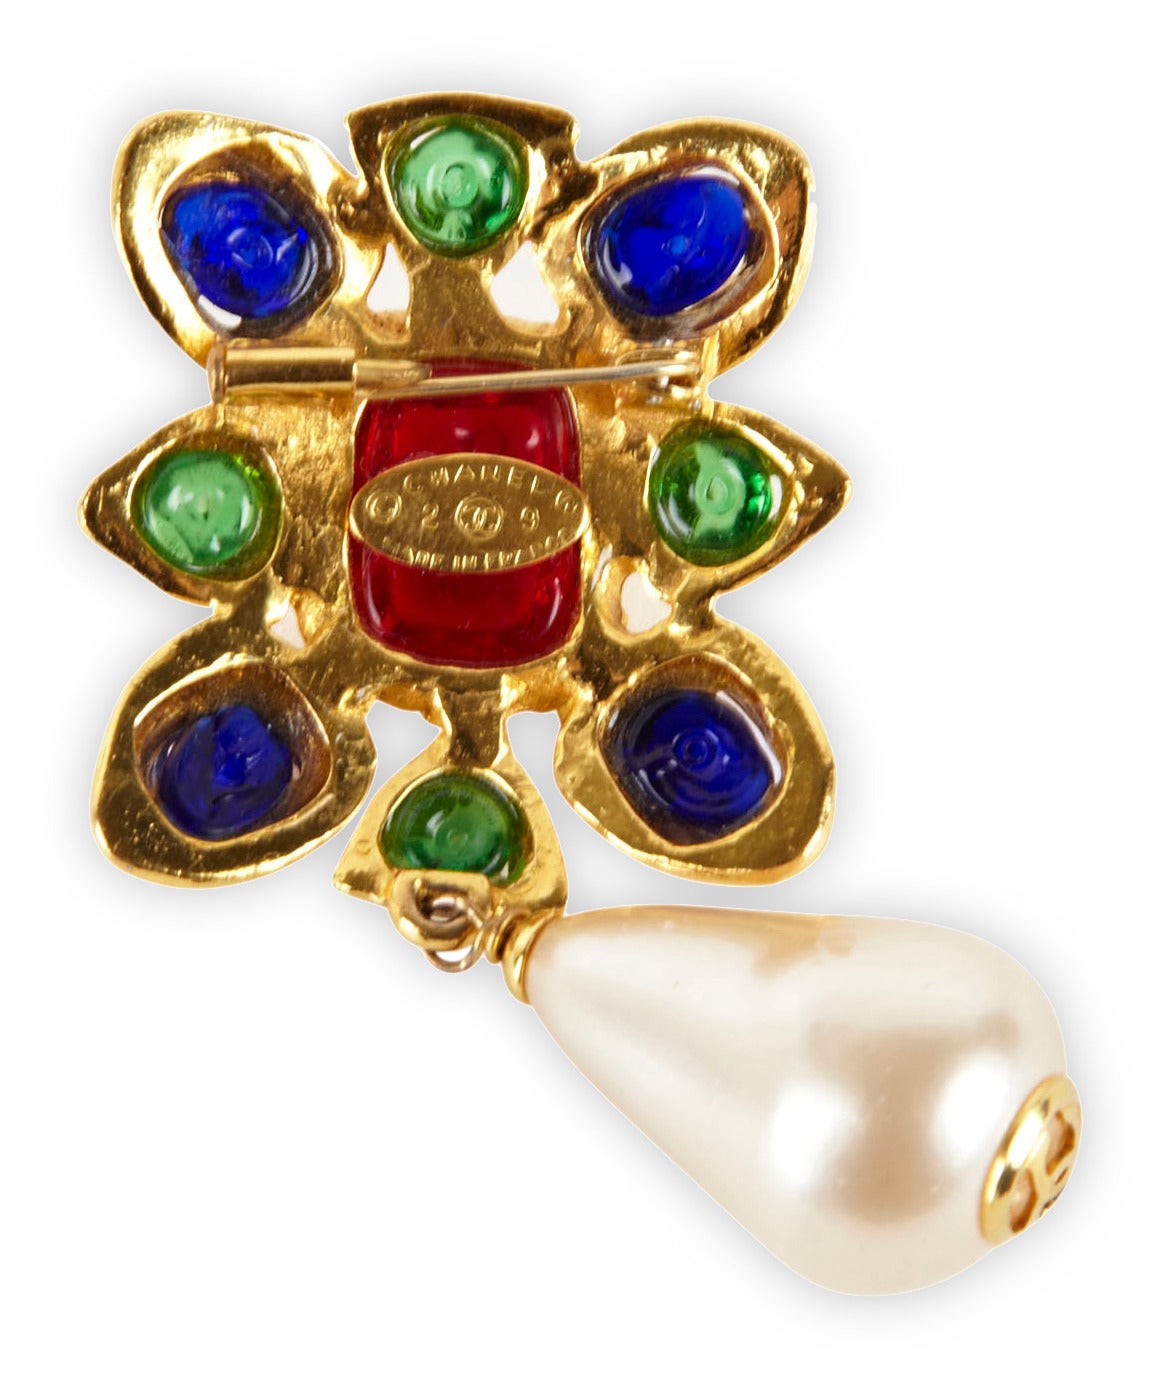 Chanel baroque poured glass brooch with large faux pearl pendant made by Maison Gripoix. The pendant is anchored by logo 